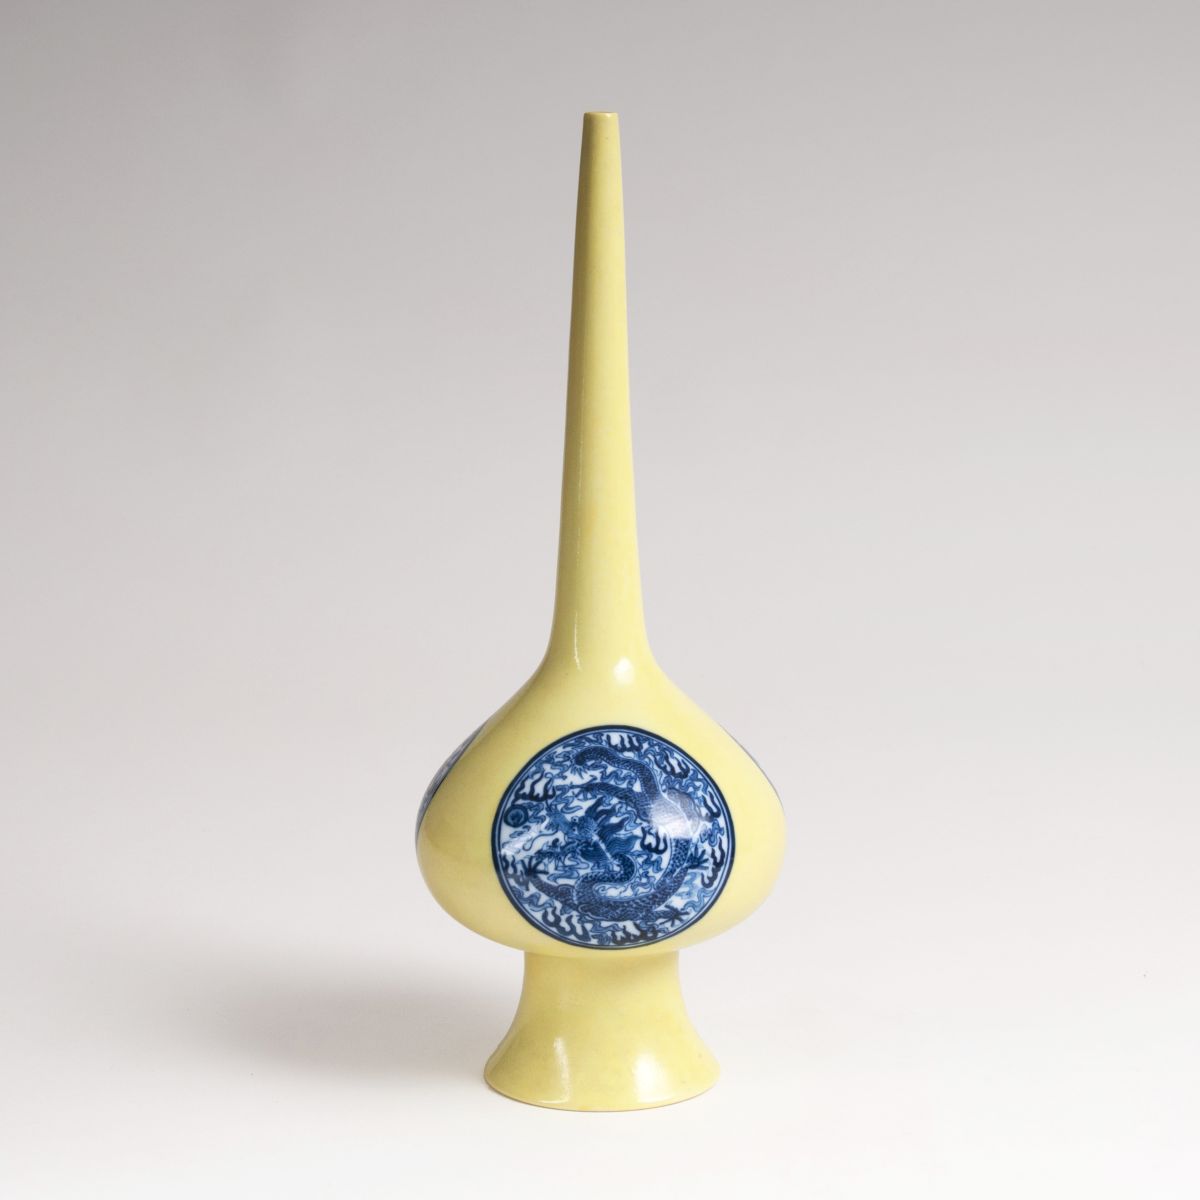 A porcelain narrow neck vase with yellow ground